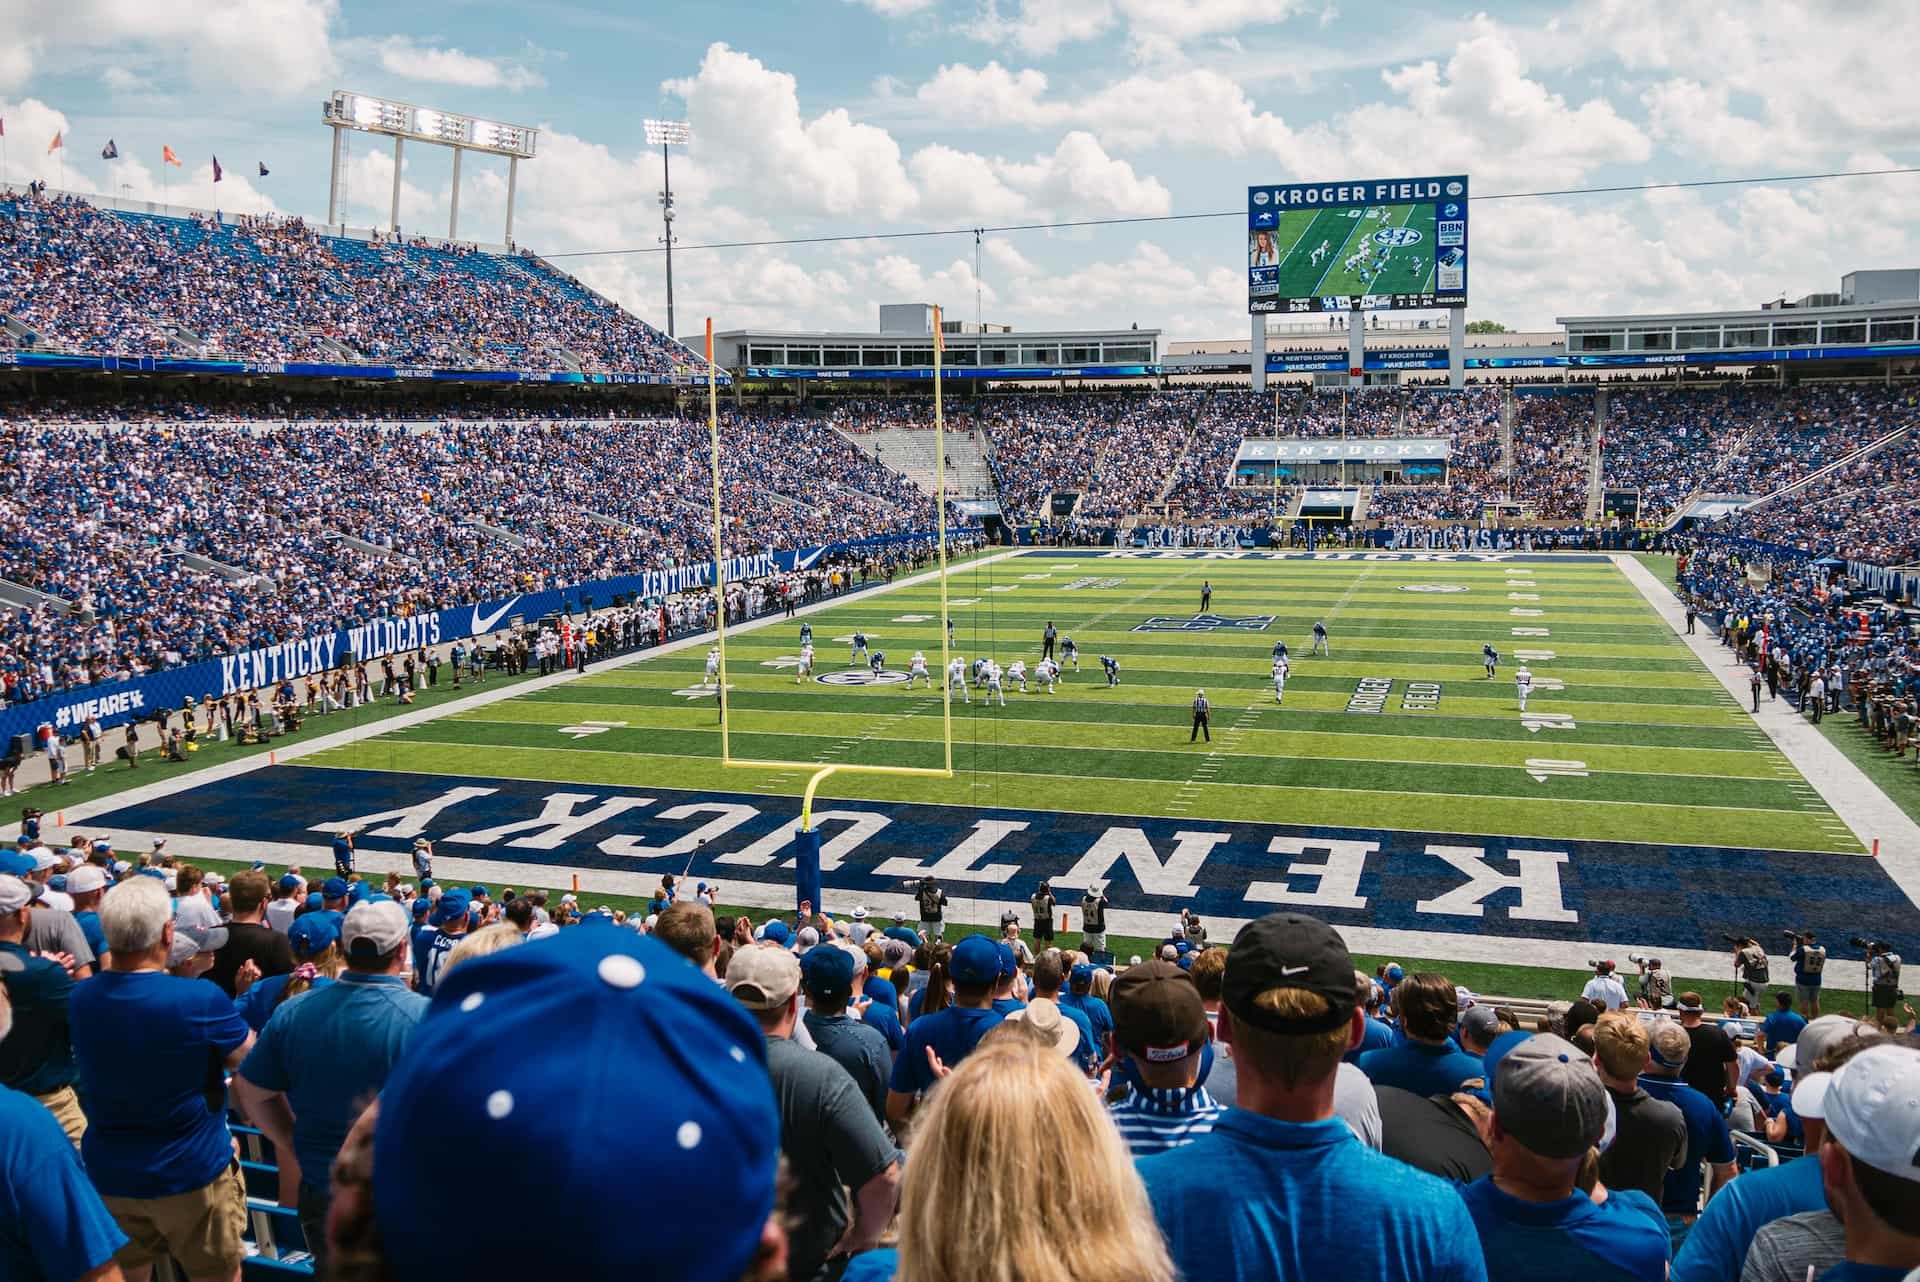 The inside of an American football stadium in the state of Kentucky during a big game, featuring thousands of spectators in the stands and two teams on the field.